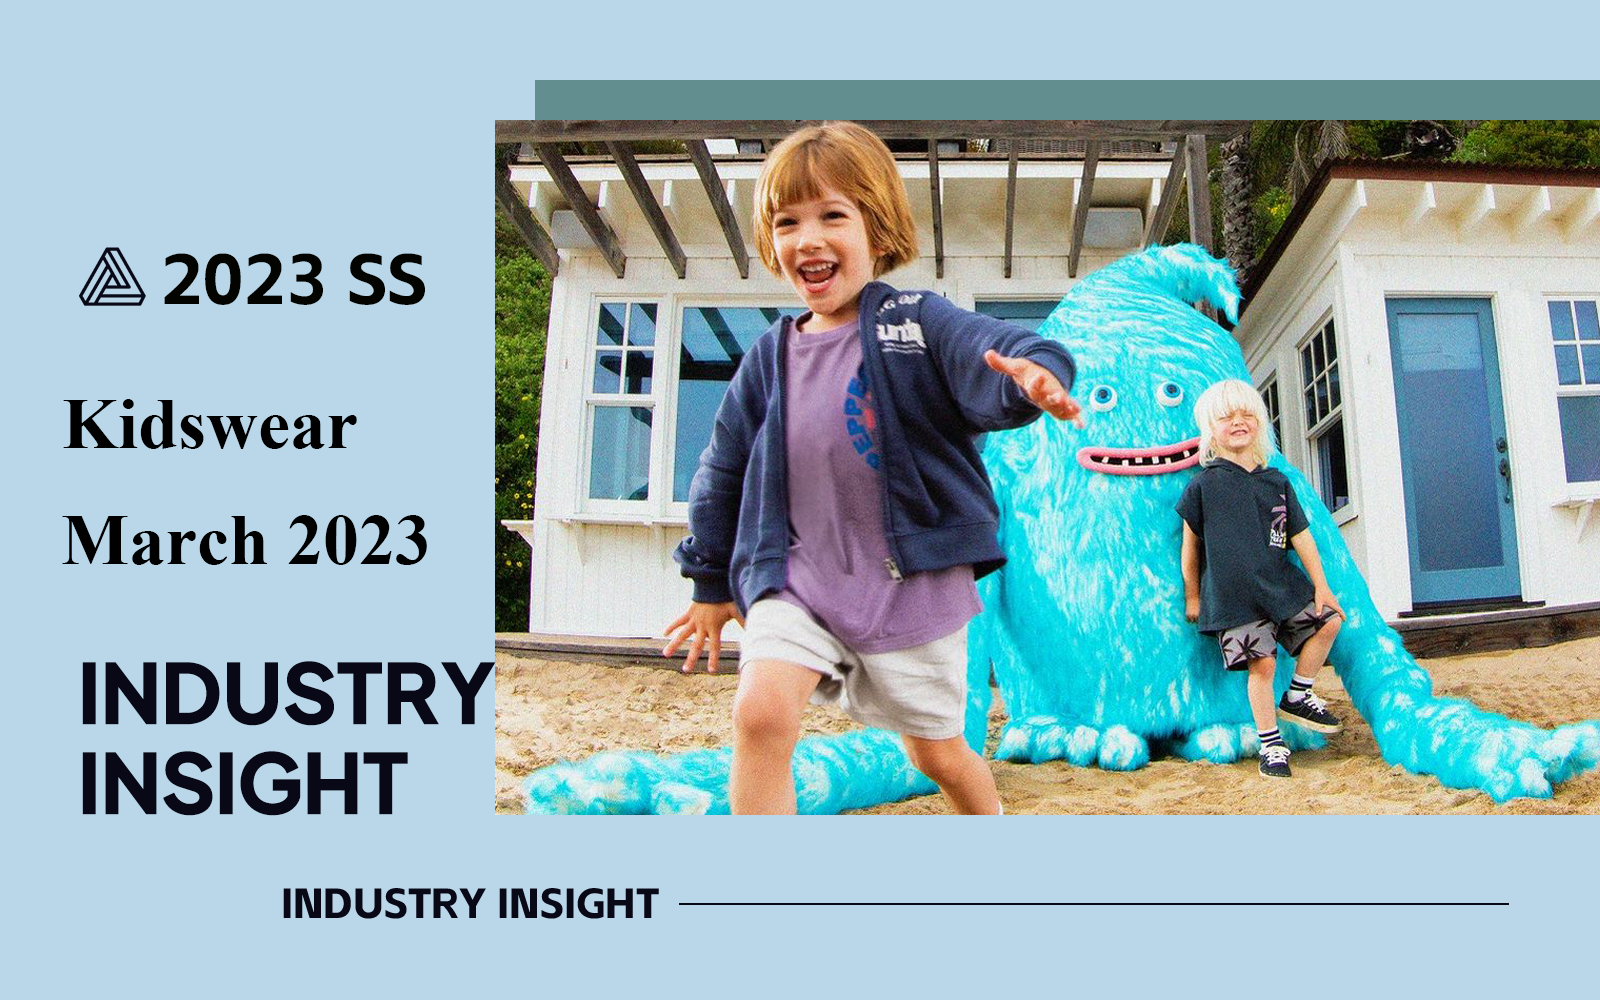 March 2023 -- The Industry Insight of Kidswear